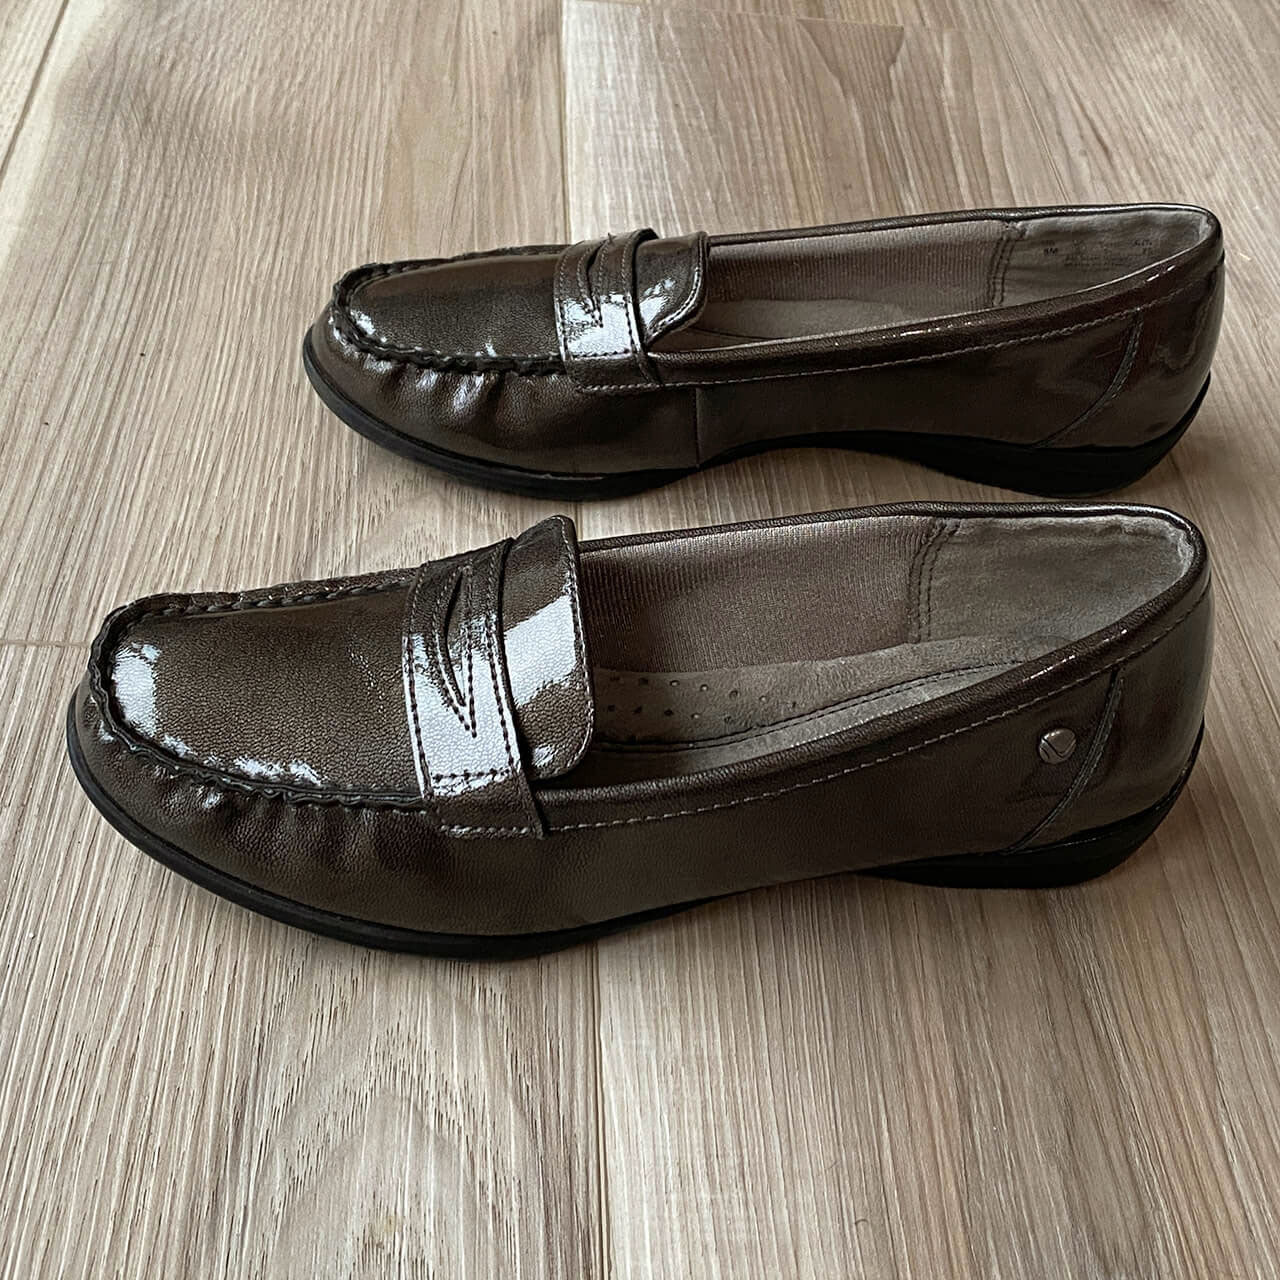 Life-Stride-Penny-Loafer-Driver-Size-8M_-Brown-Patent-Leather_-side-view_-shop-eBargainsAndDeals.com_